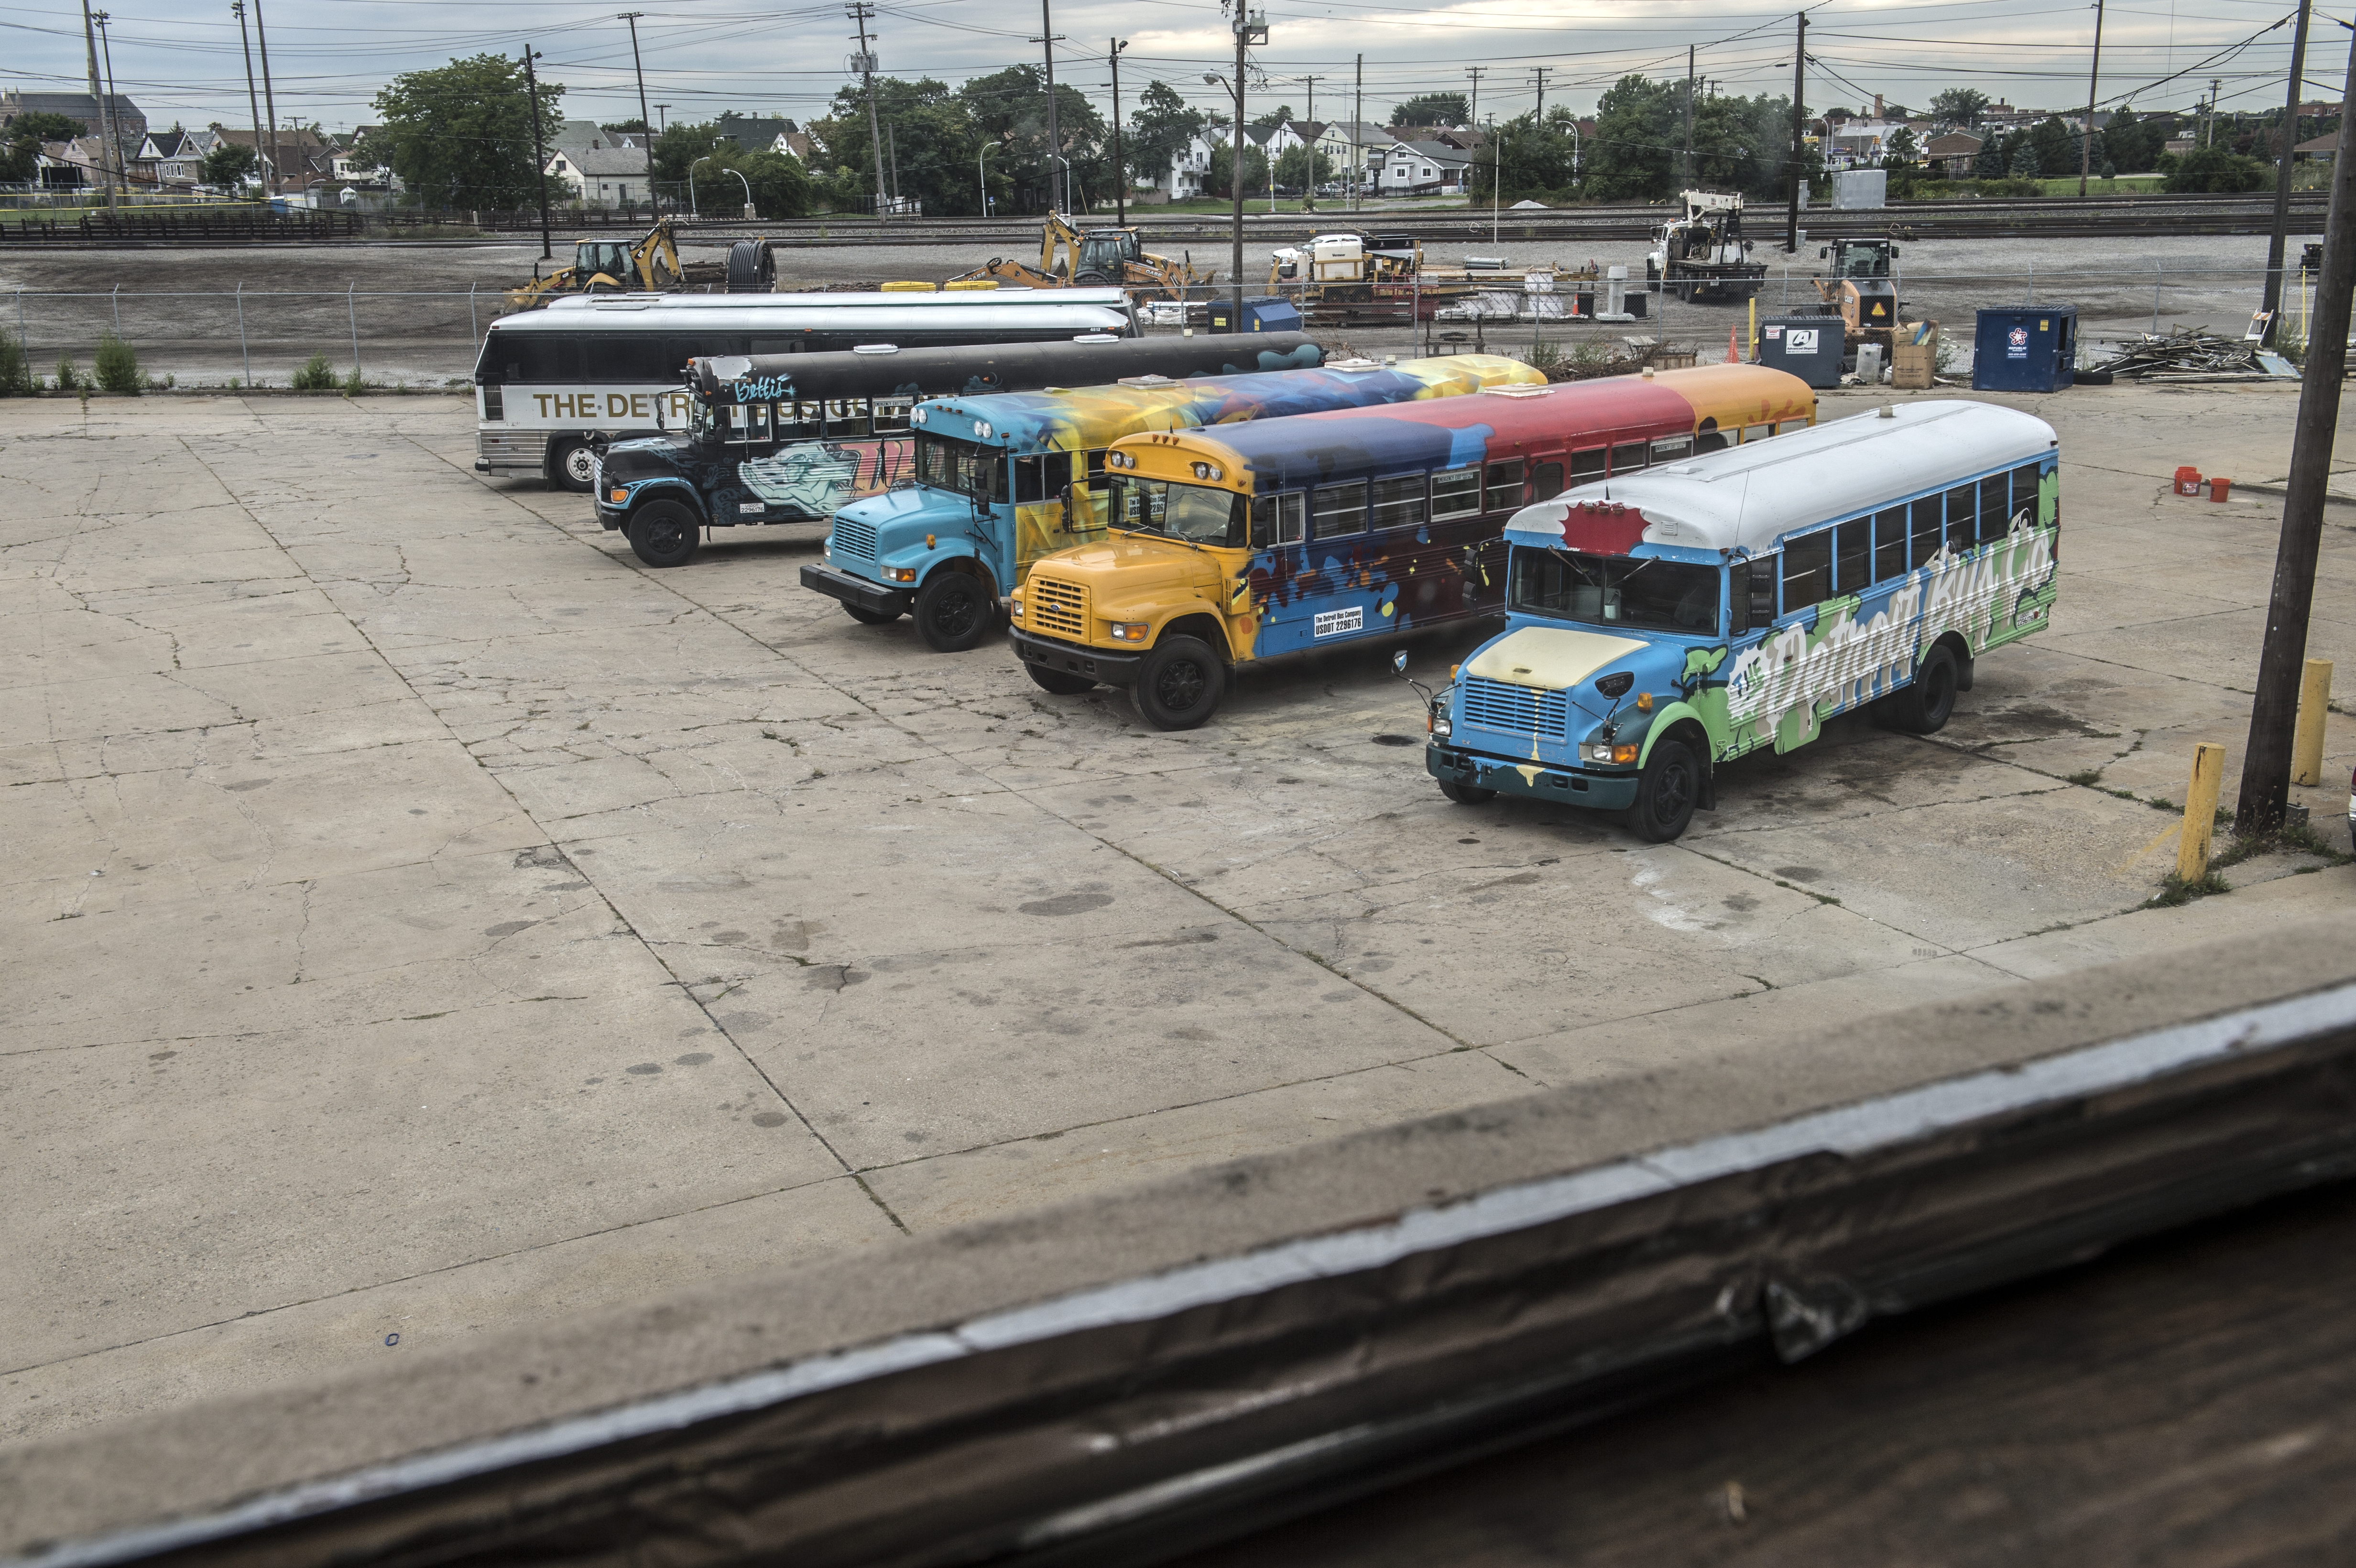 The Detroit Bus Company includes a fleet of refurbished school buses with vibrant paint, Wi-Fi and great speakers. “We have done big things as a city without fancy toys,” says founder and owner Andy Didorosi. Photo: Amy Vitale.